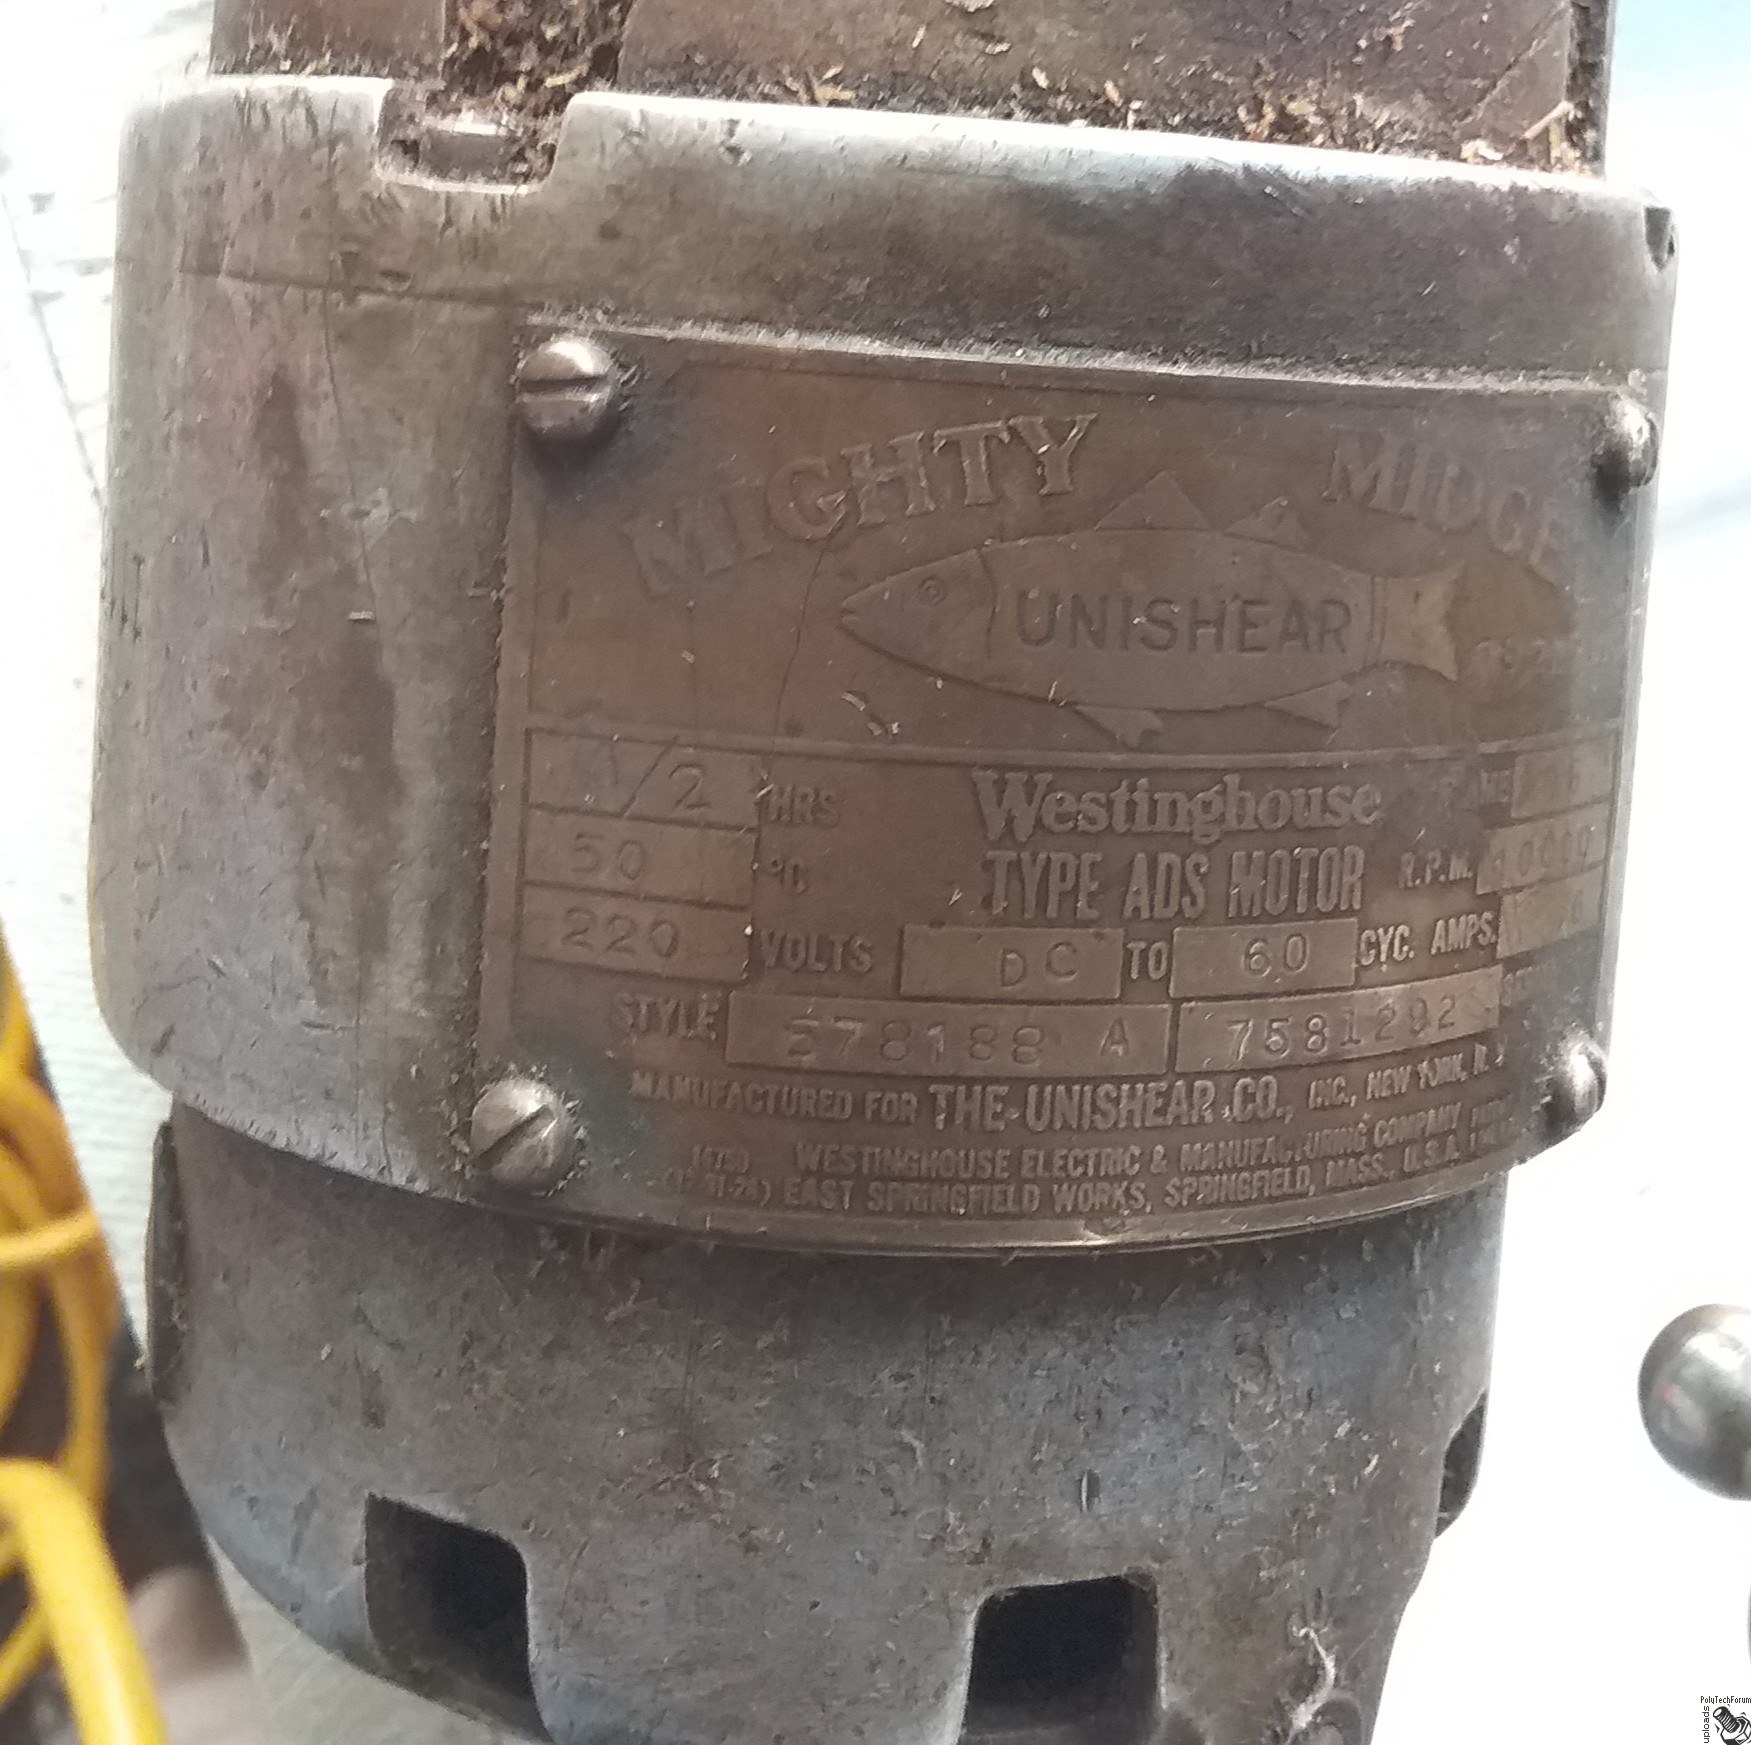 Image for Mighty midget unishear Westinghouse 220 volt. Looking for age and value.